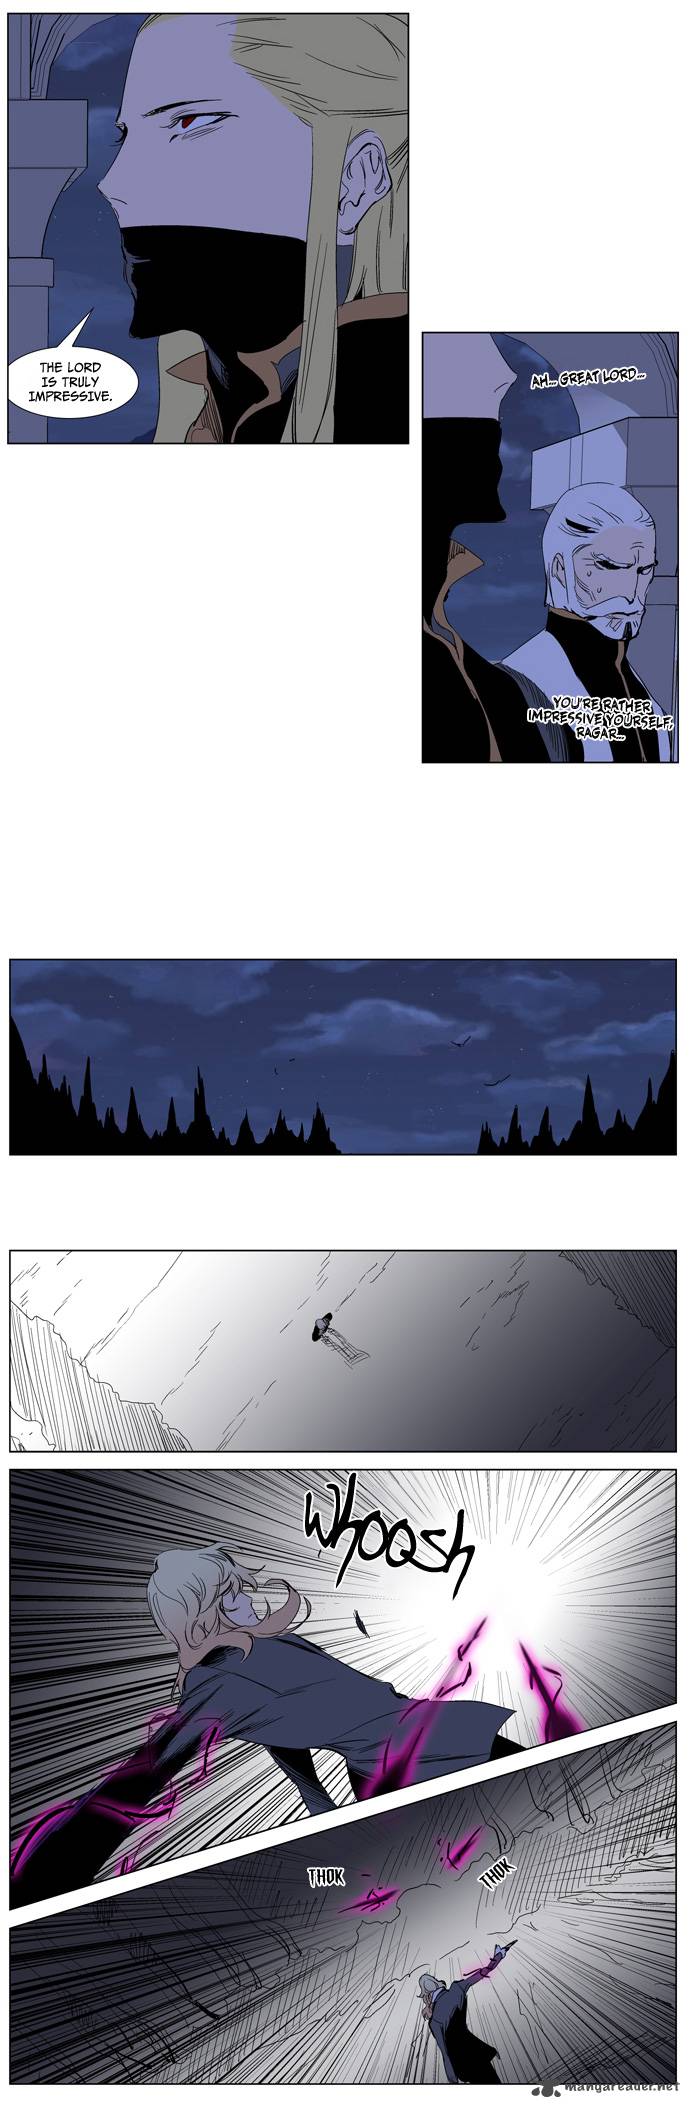 Noblesse Chapter 240 Page 10